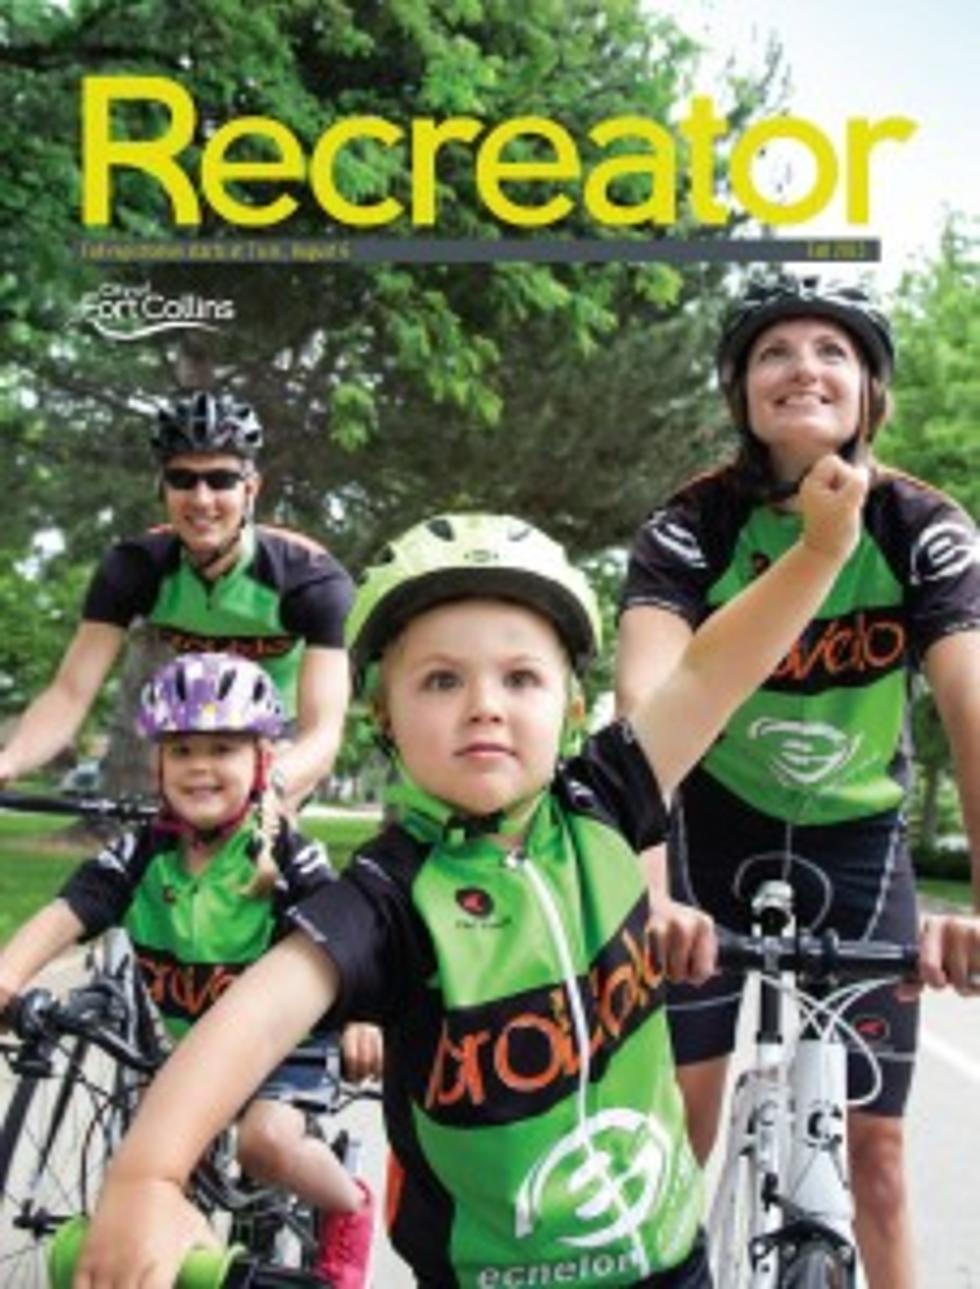 Take a Class This Fall With the Fort Collins Recreator, Sign Up Starts Thursday, August 6th